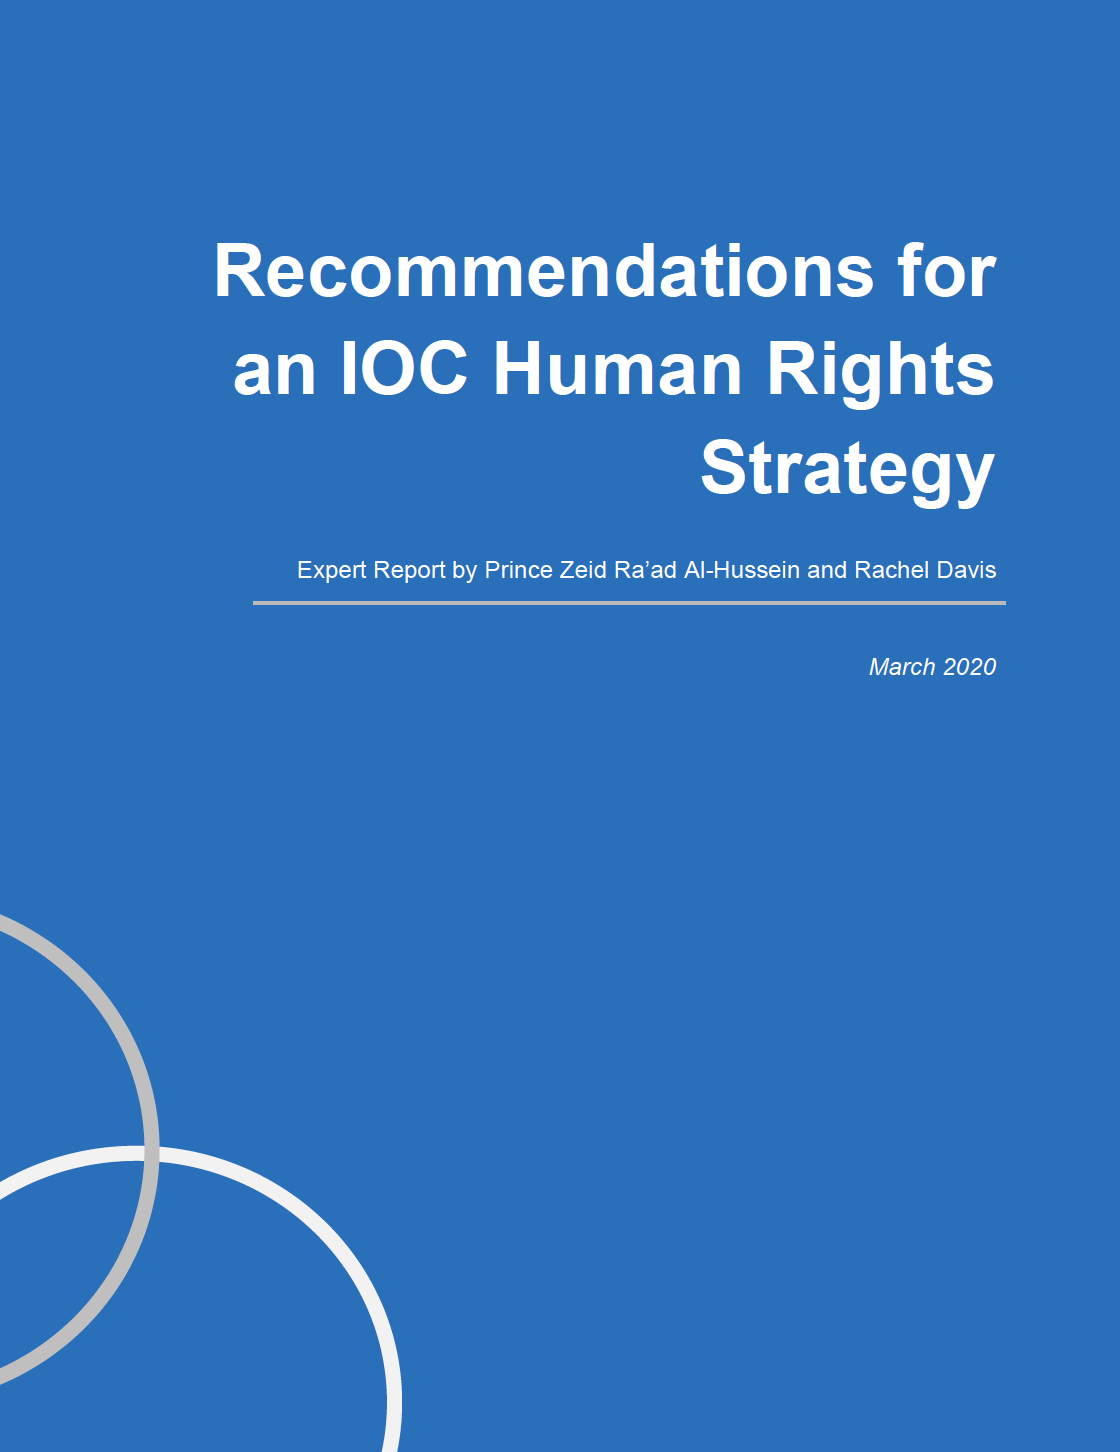 Summary of Recommendations for an IOC Human Rights Strategy